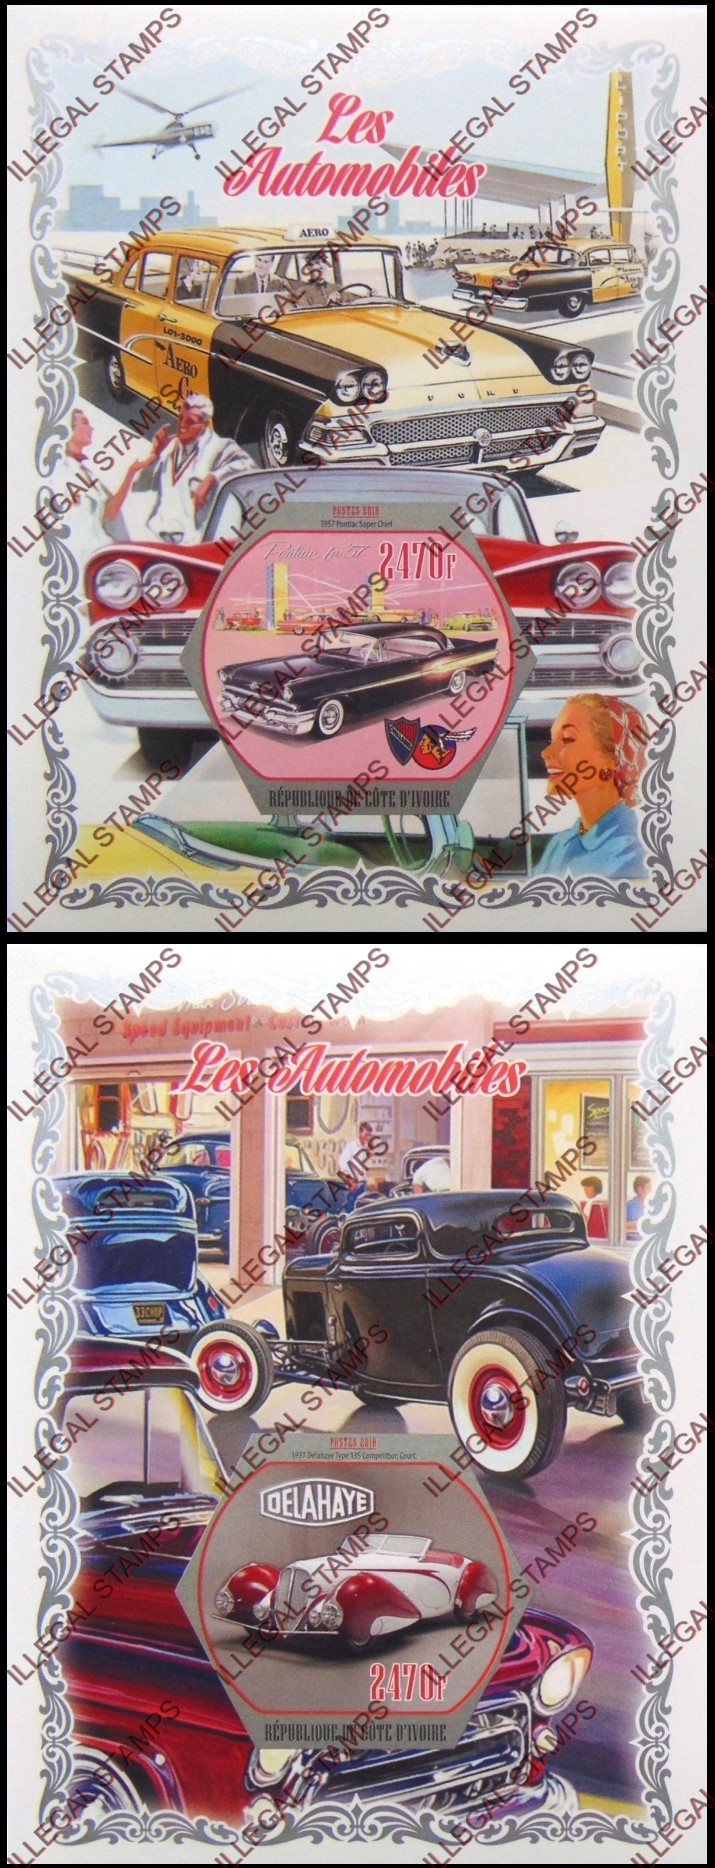 Ivory Coast 2018 Automobiles Illegal Stamp Souvenir Sheets of 1